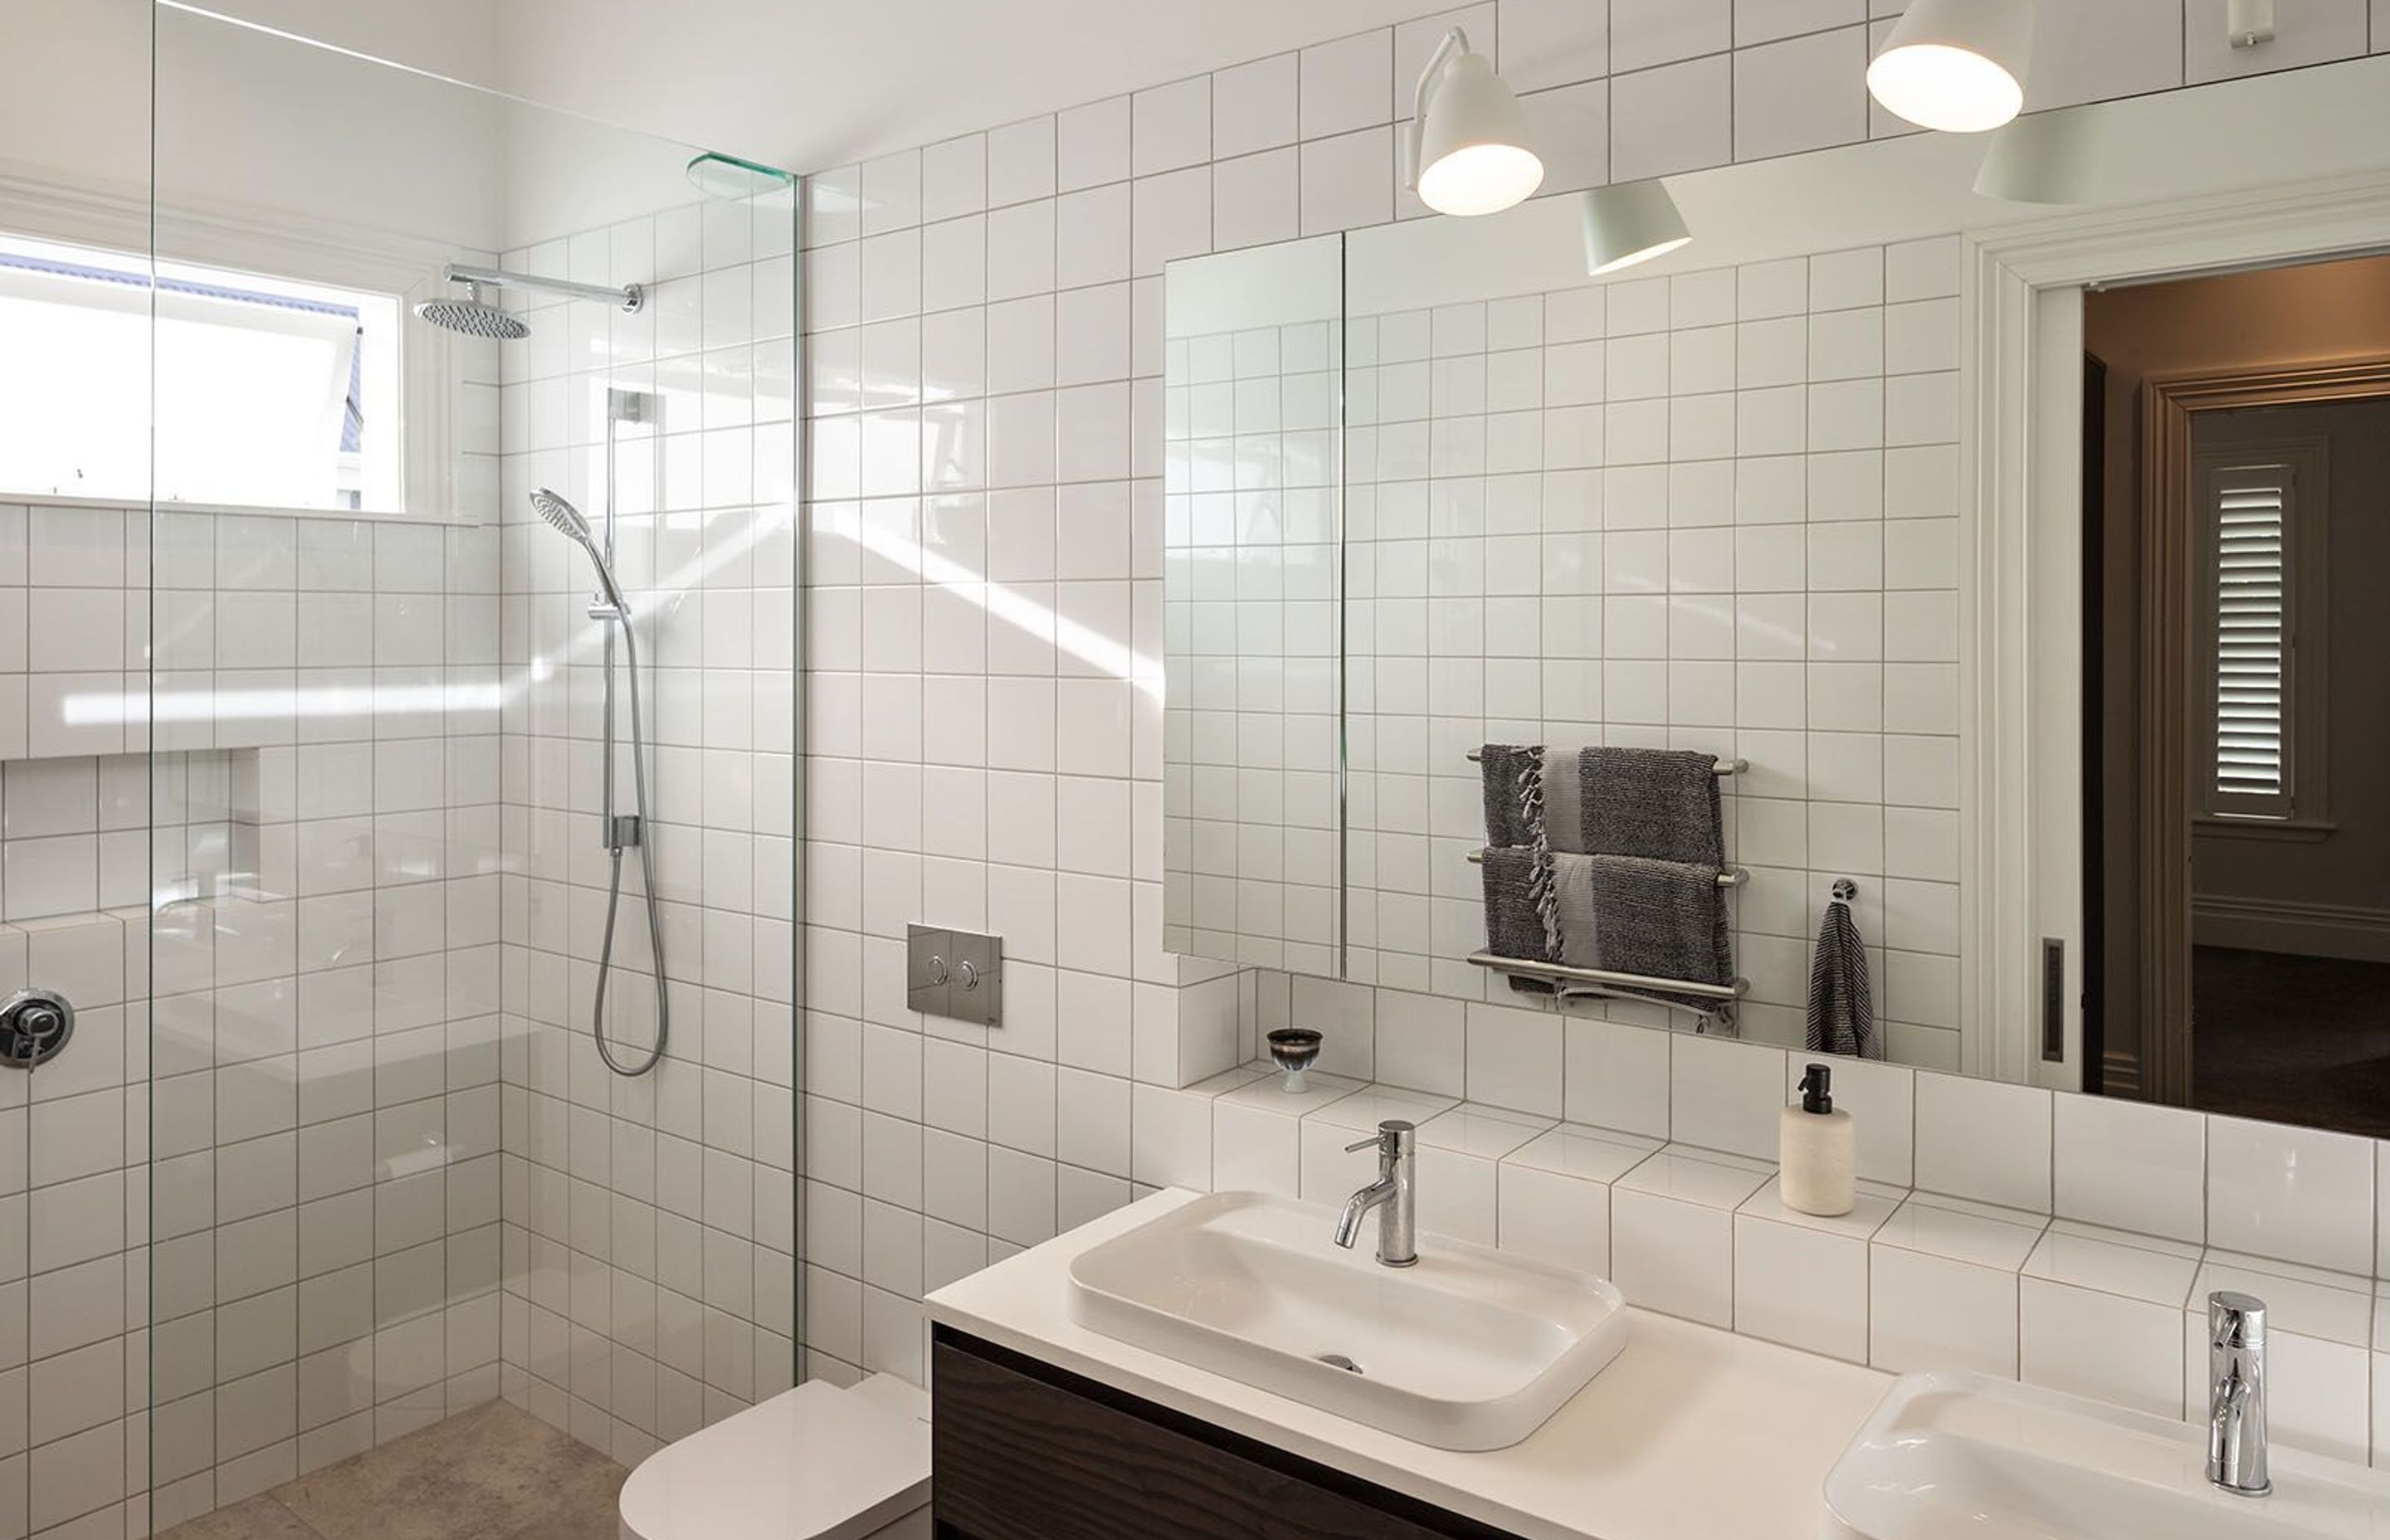 A palette of white tiles and natural materials in the main bathroom, imparts a simple, uncomplicated aesthetic.